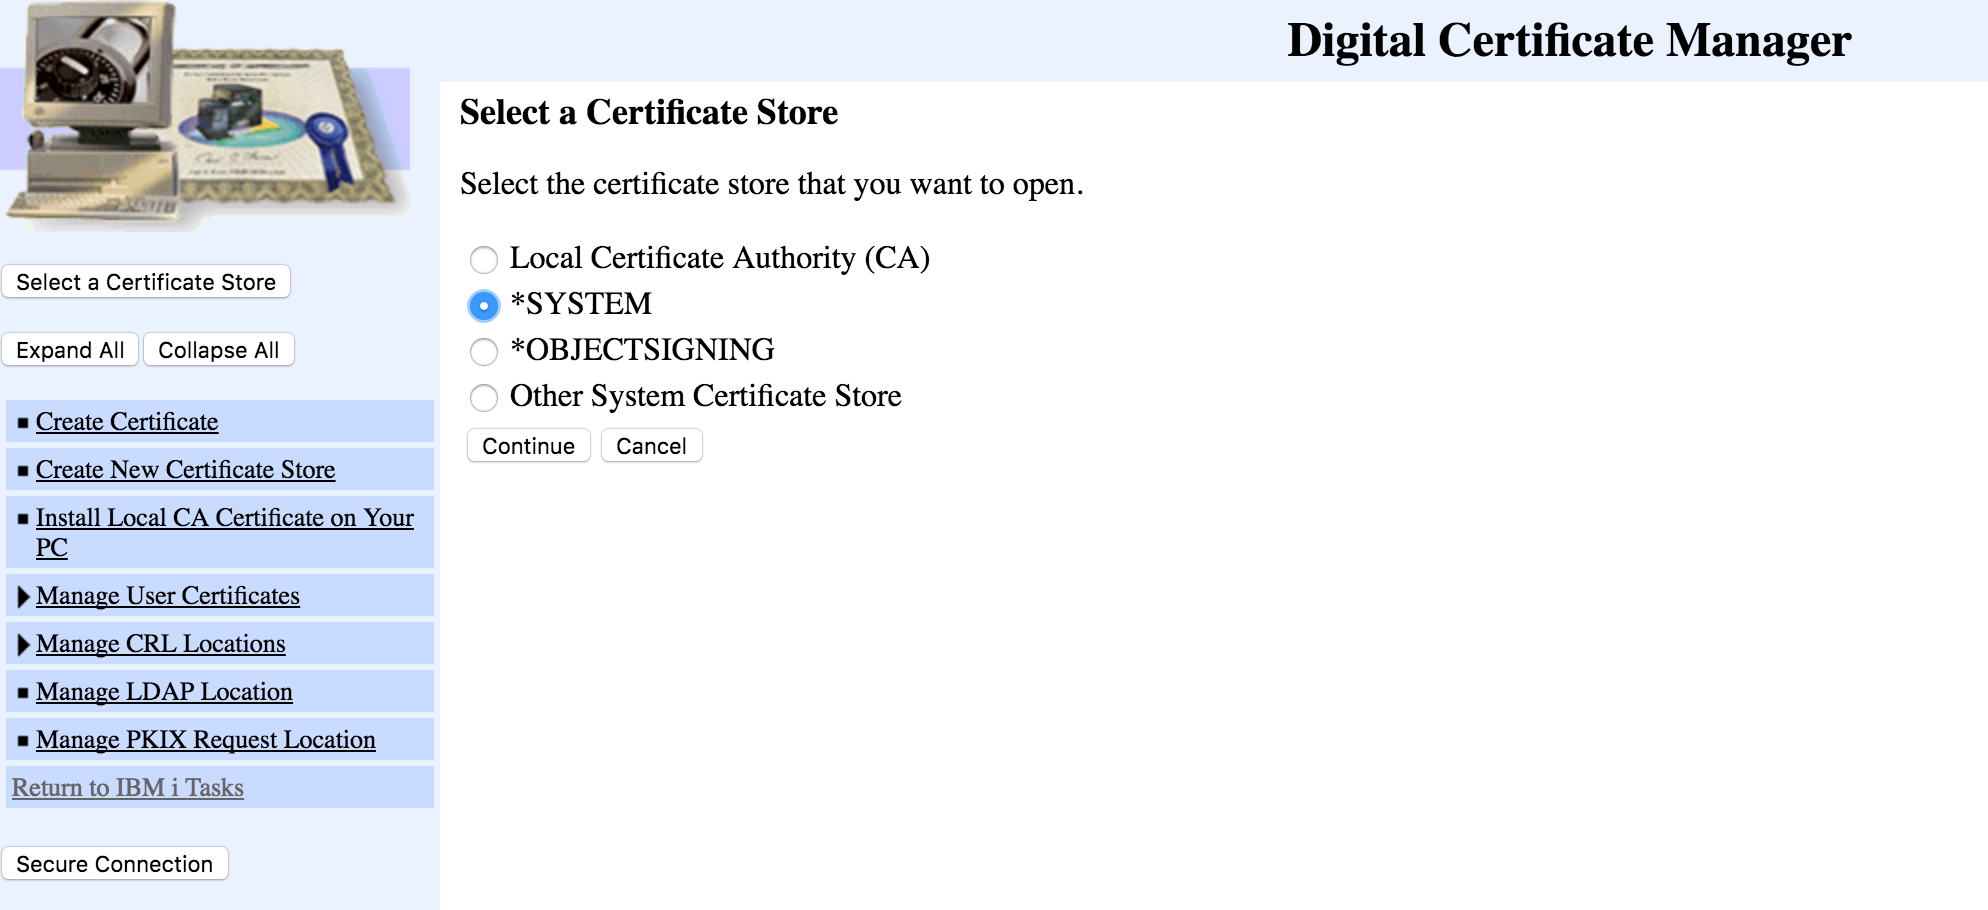 Select *SYSTEM Certificate Store